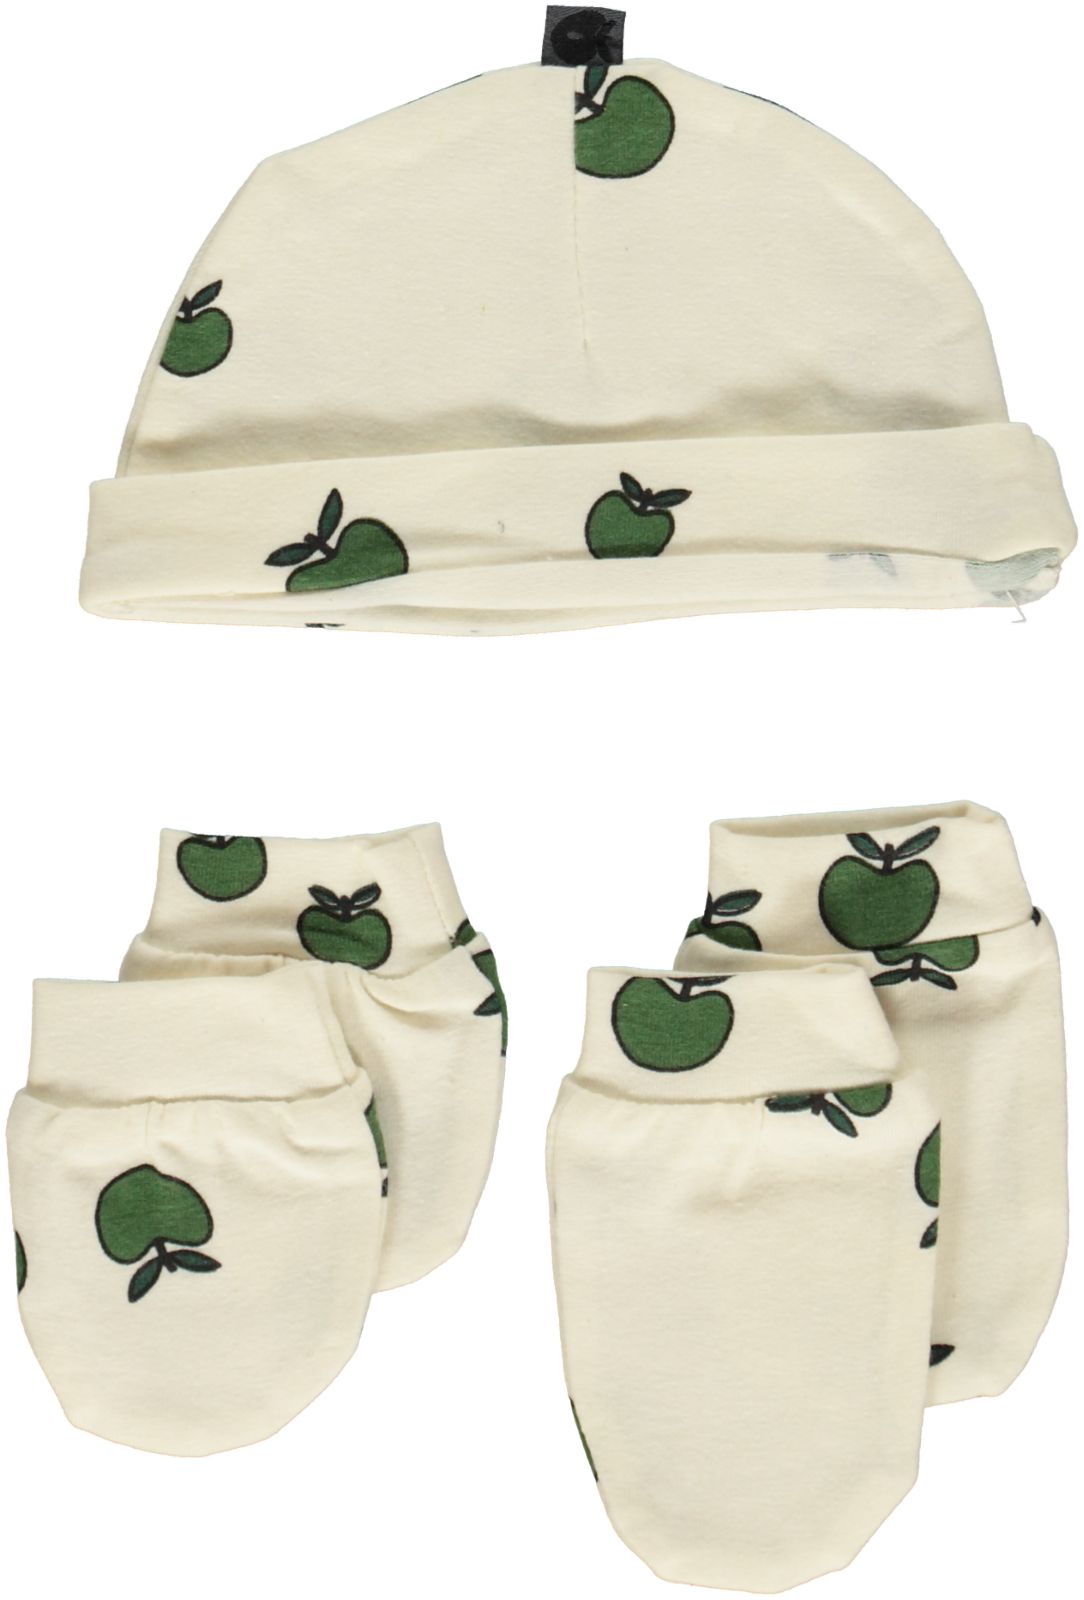 Premature Accessories set with Apples